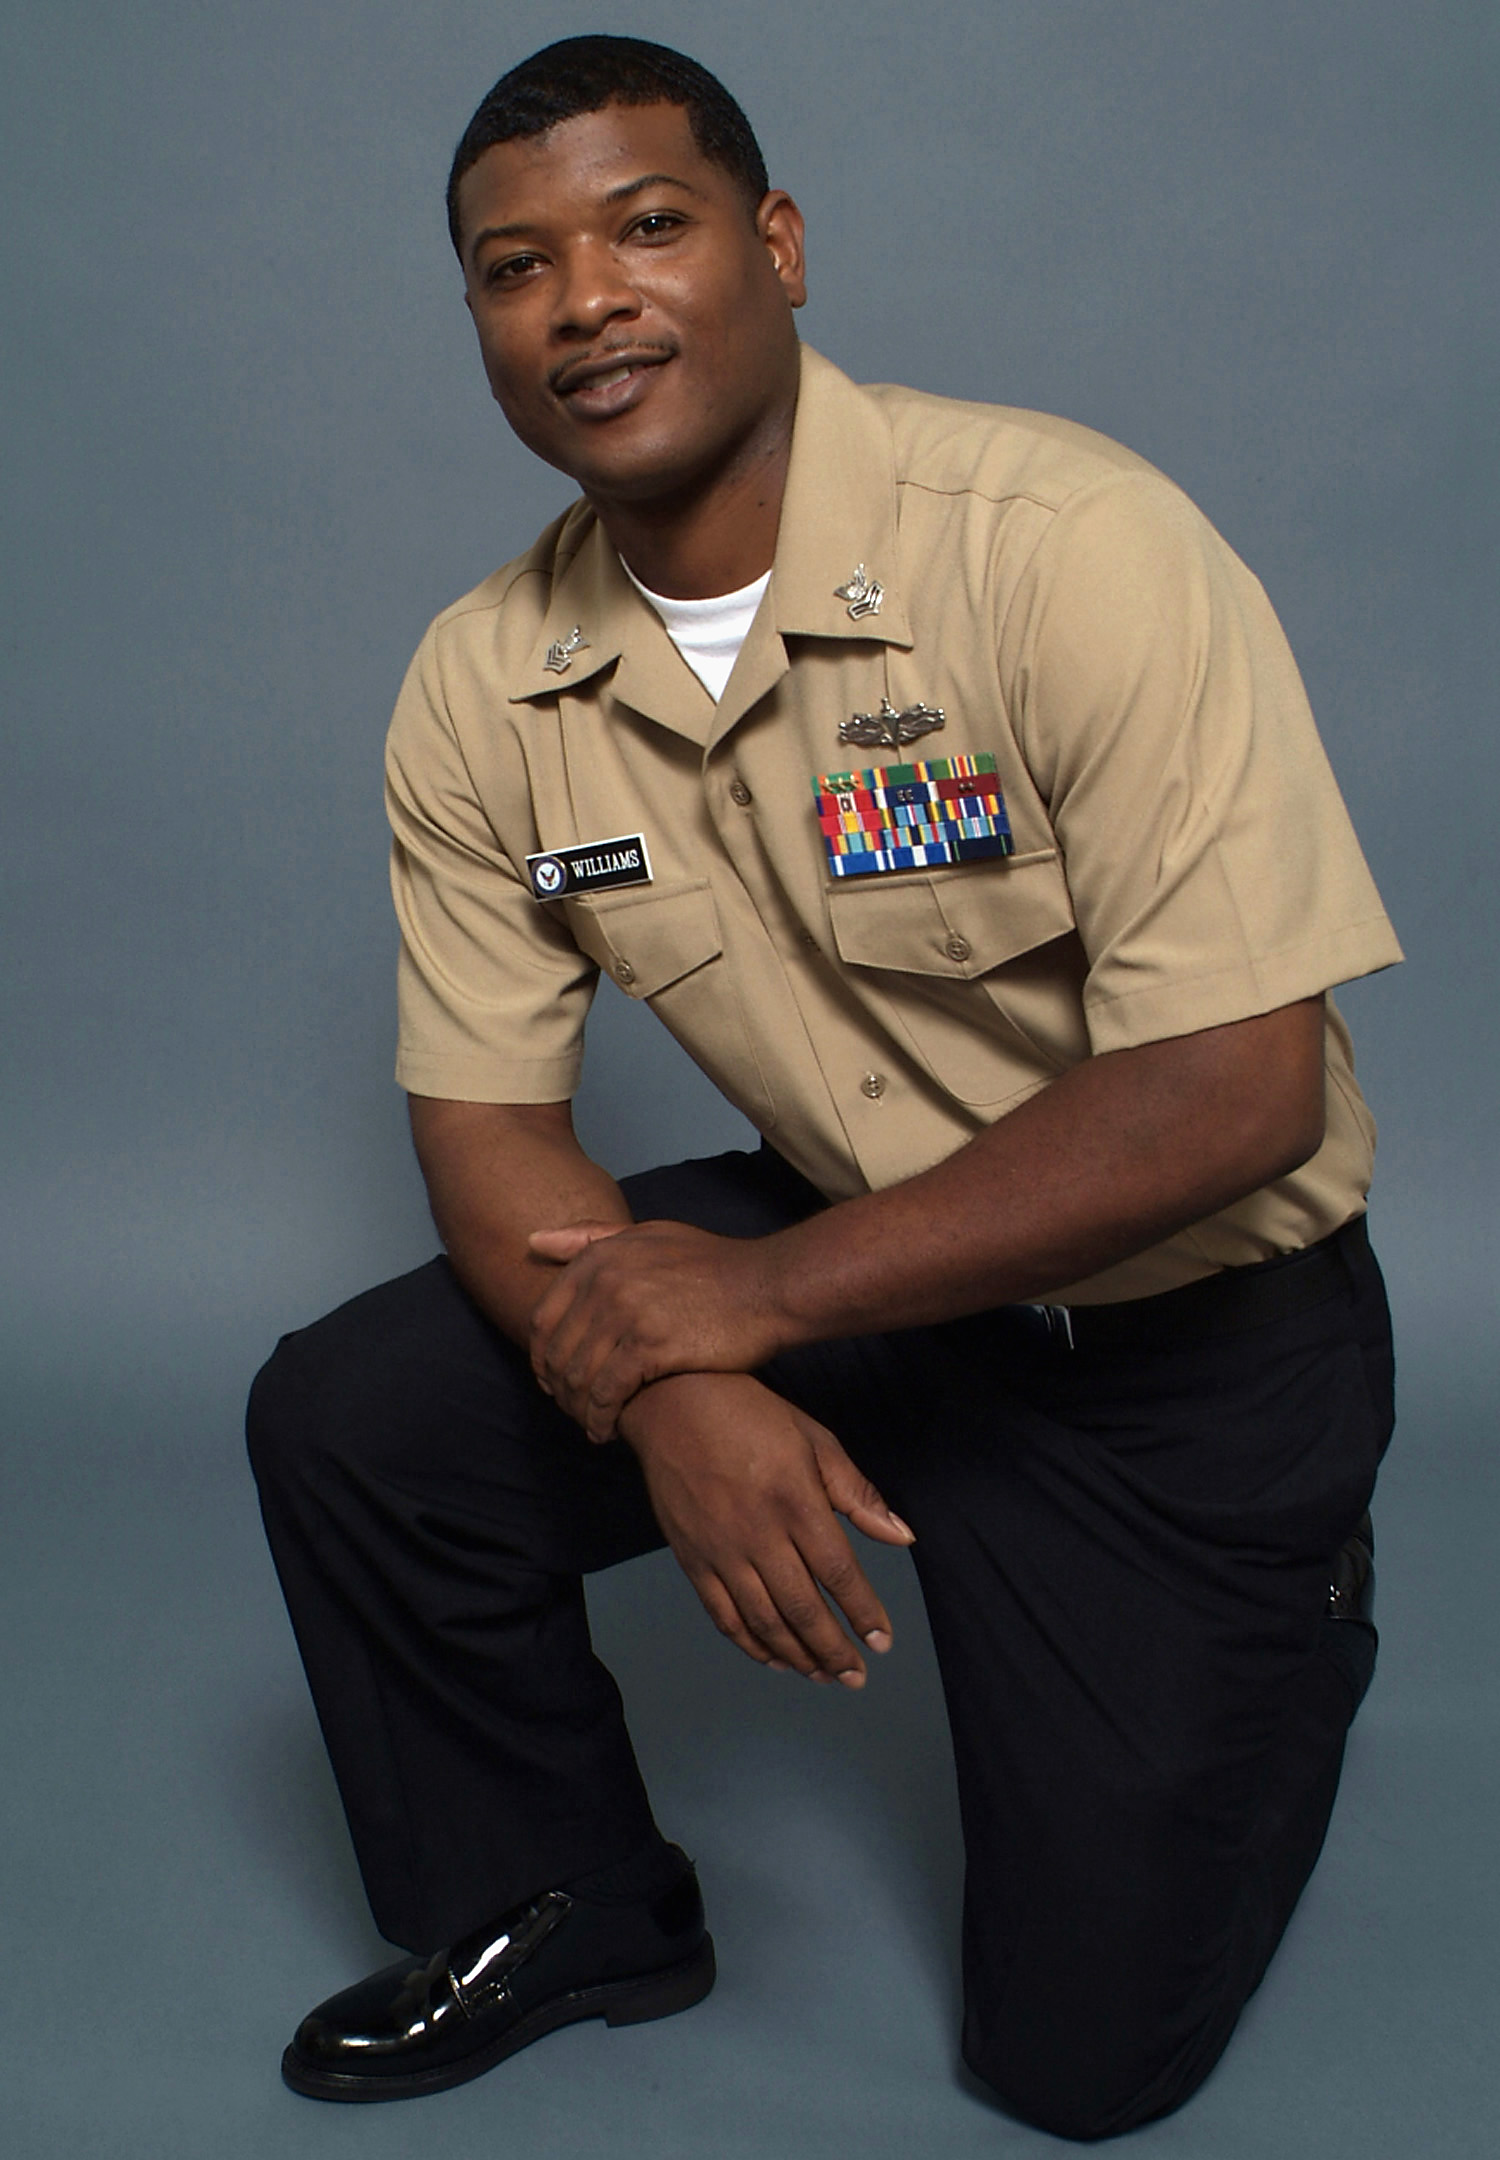 US Navy 080730-N-7090S-004 Personnel Specialist 1st Class Howard Williams models the new E-6 and below Service Uniform (SU). The SU is for year-round wear and replaces summer white and winter blue uniforms